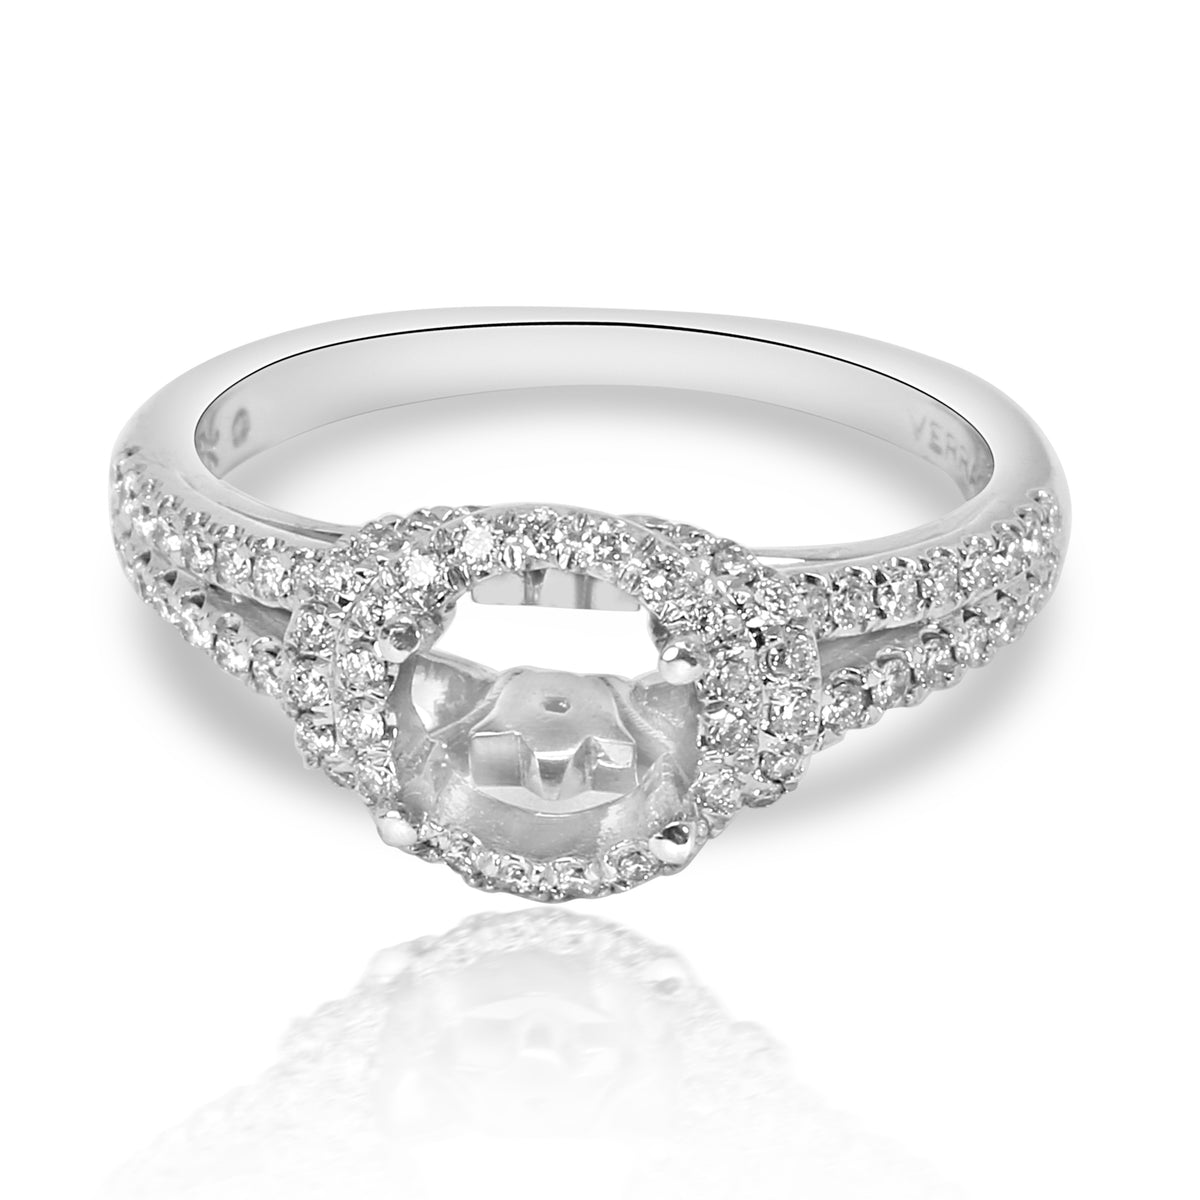 Verragio Couture Collection Diamond Engagement Ring Setting in 18K White Gold